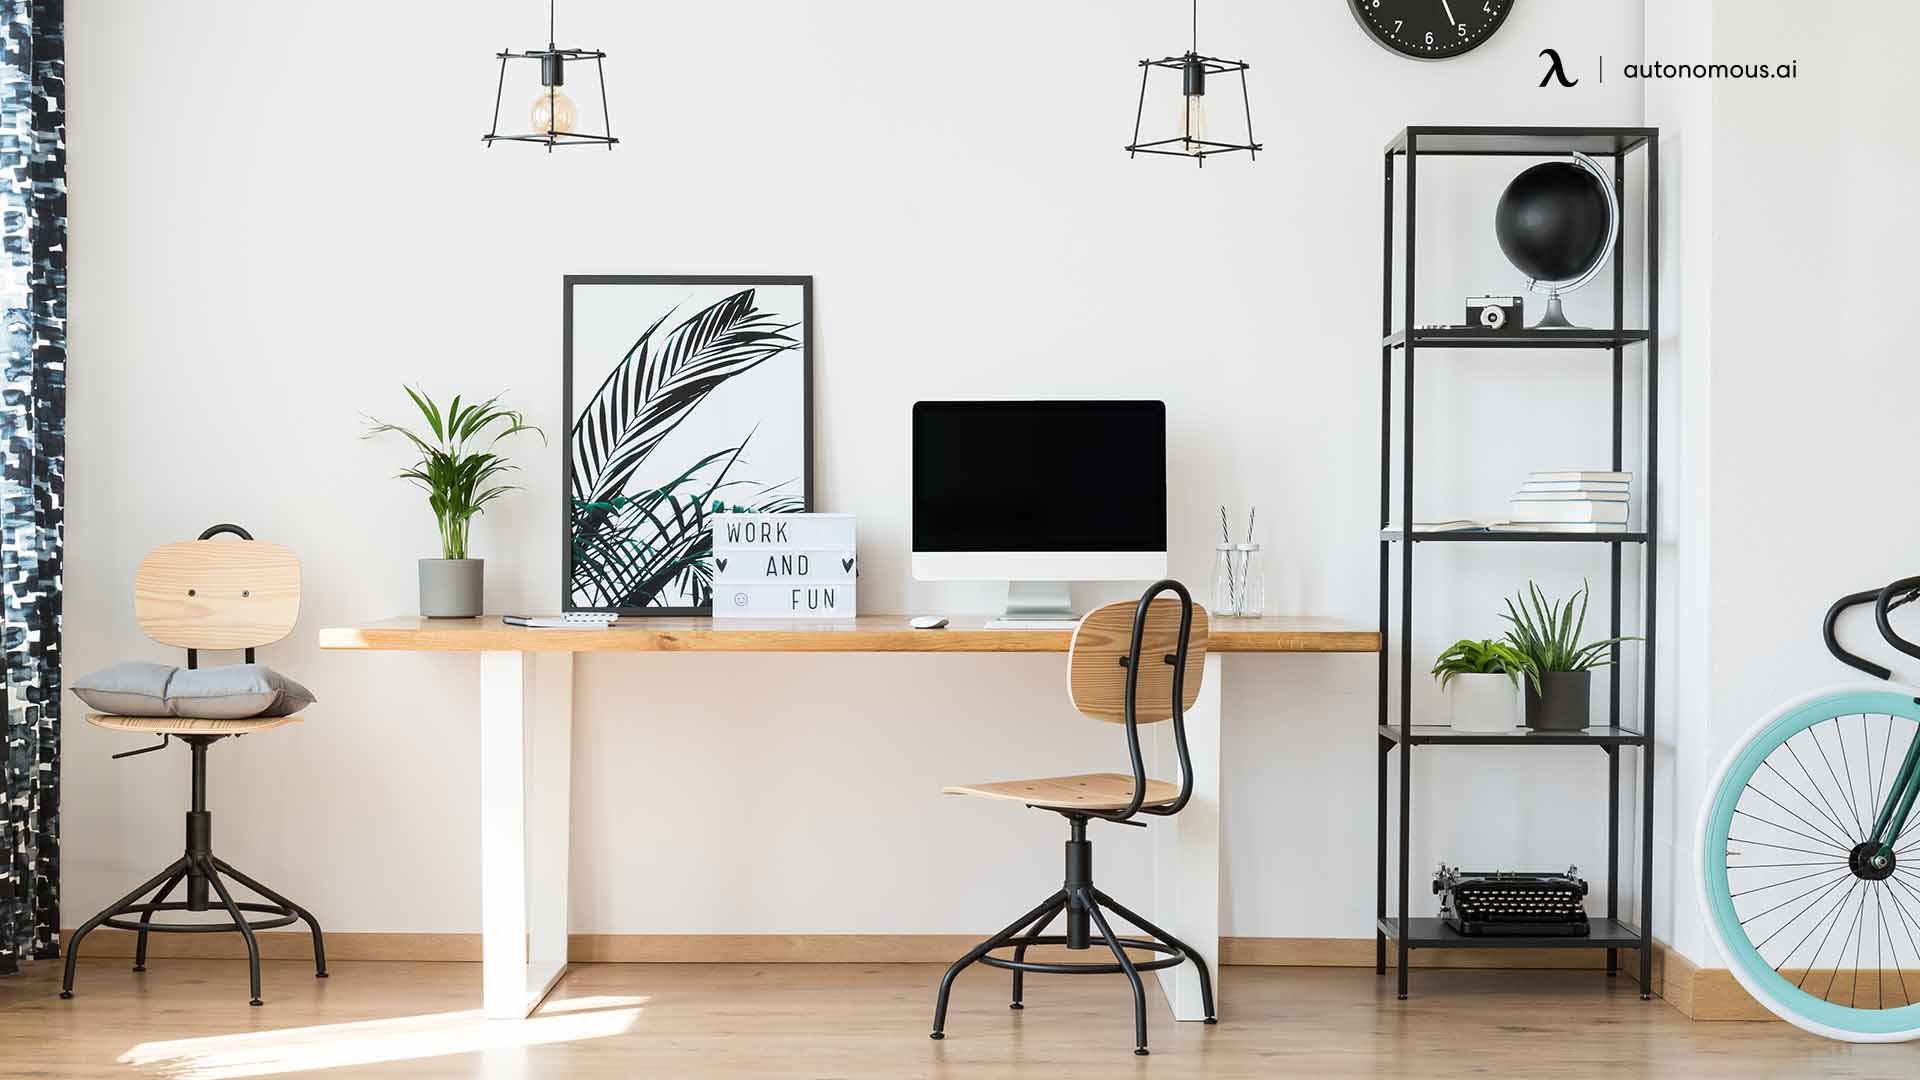 8 Ways for Minimal Office Décor for Any Workspace